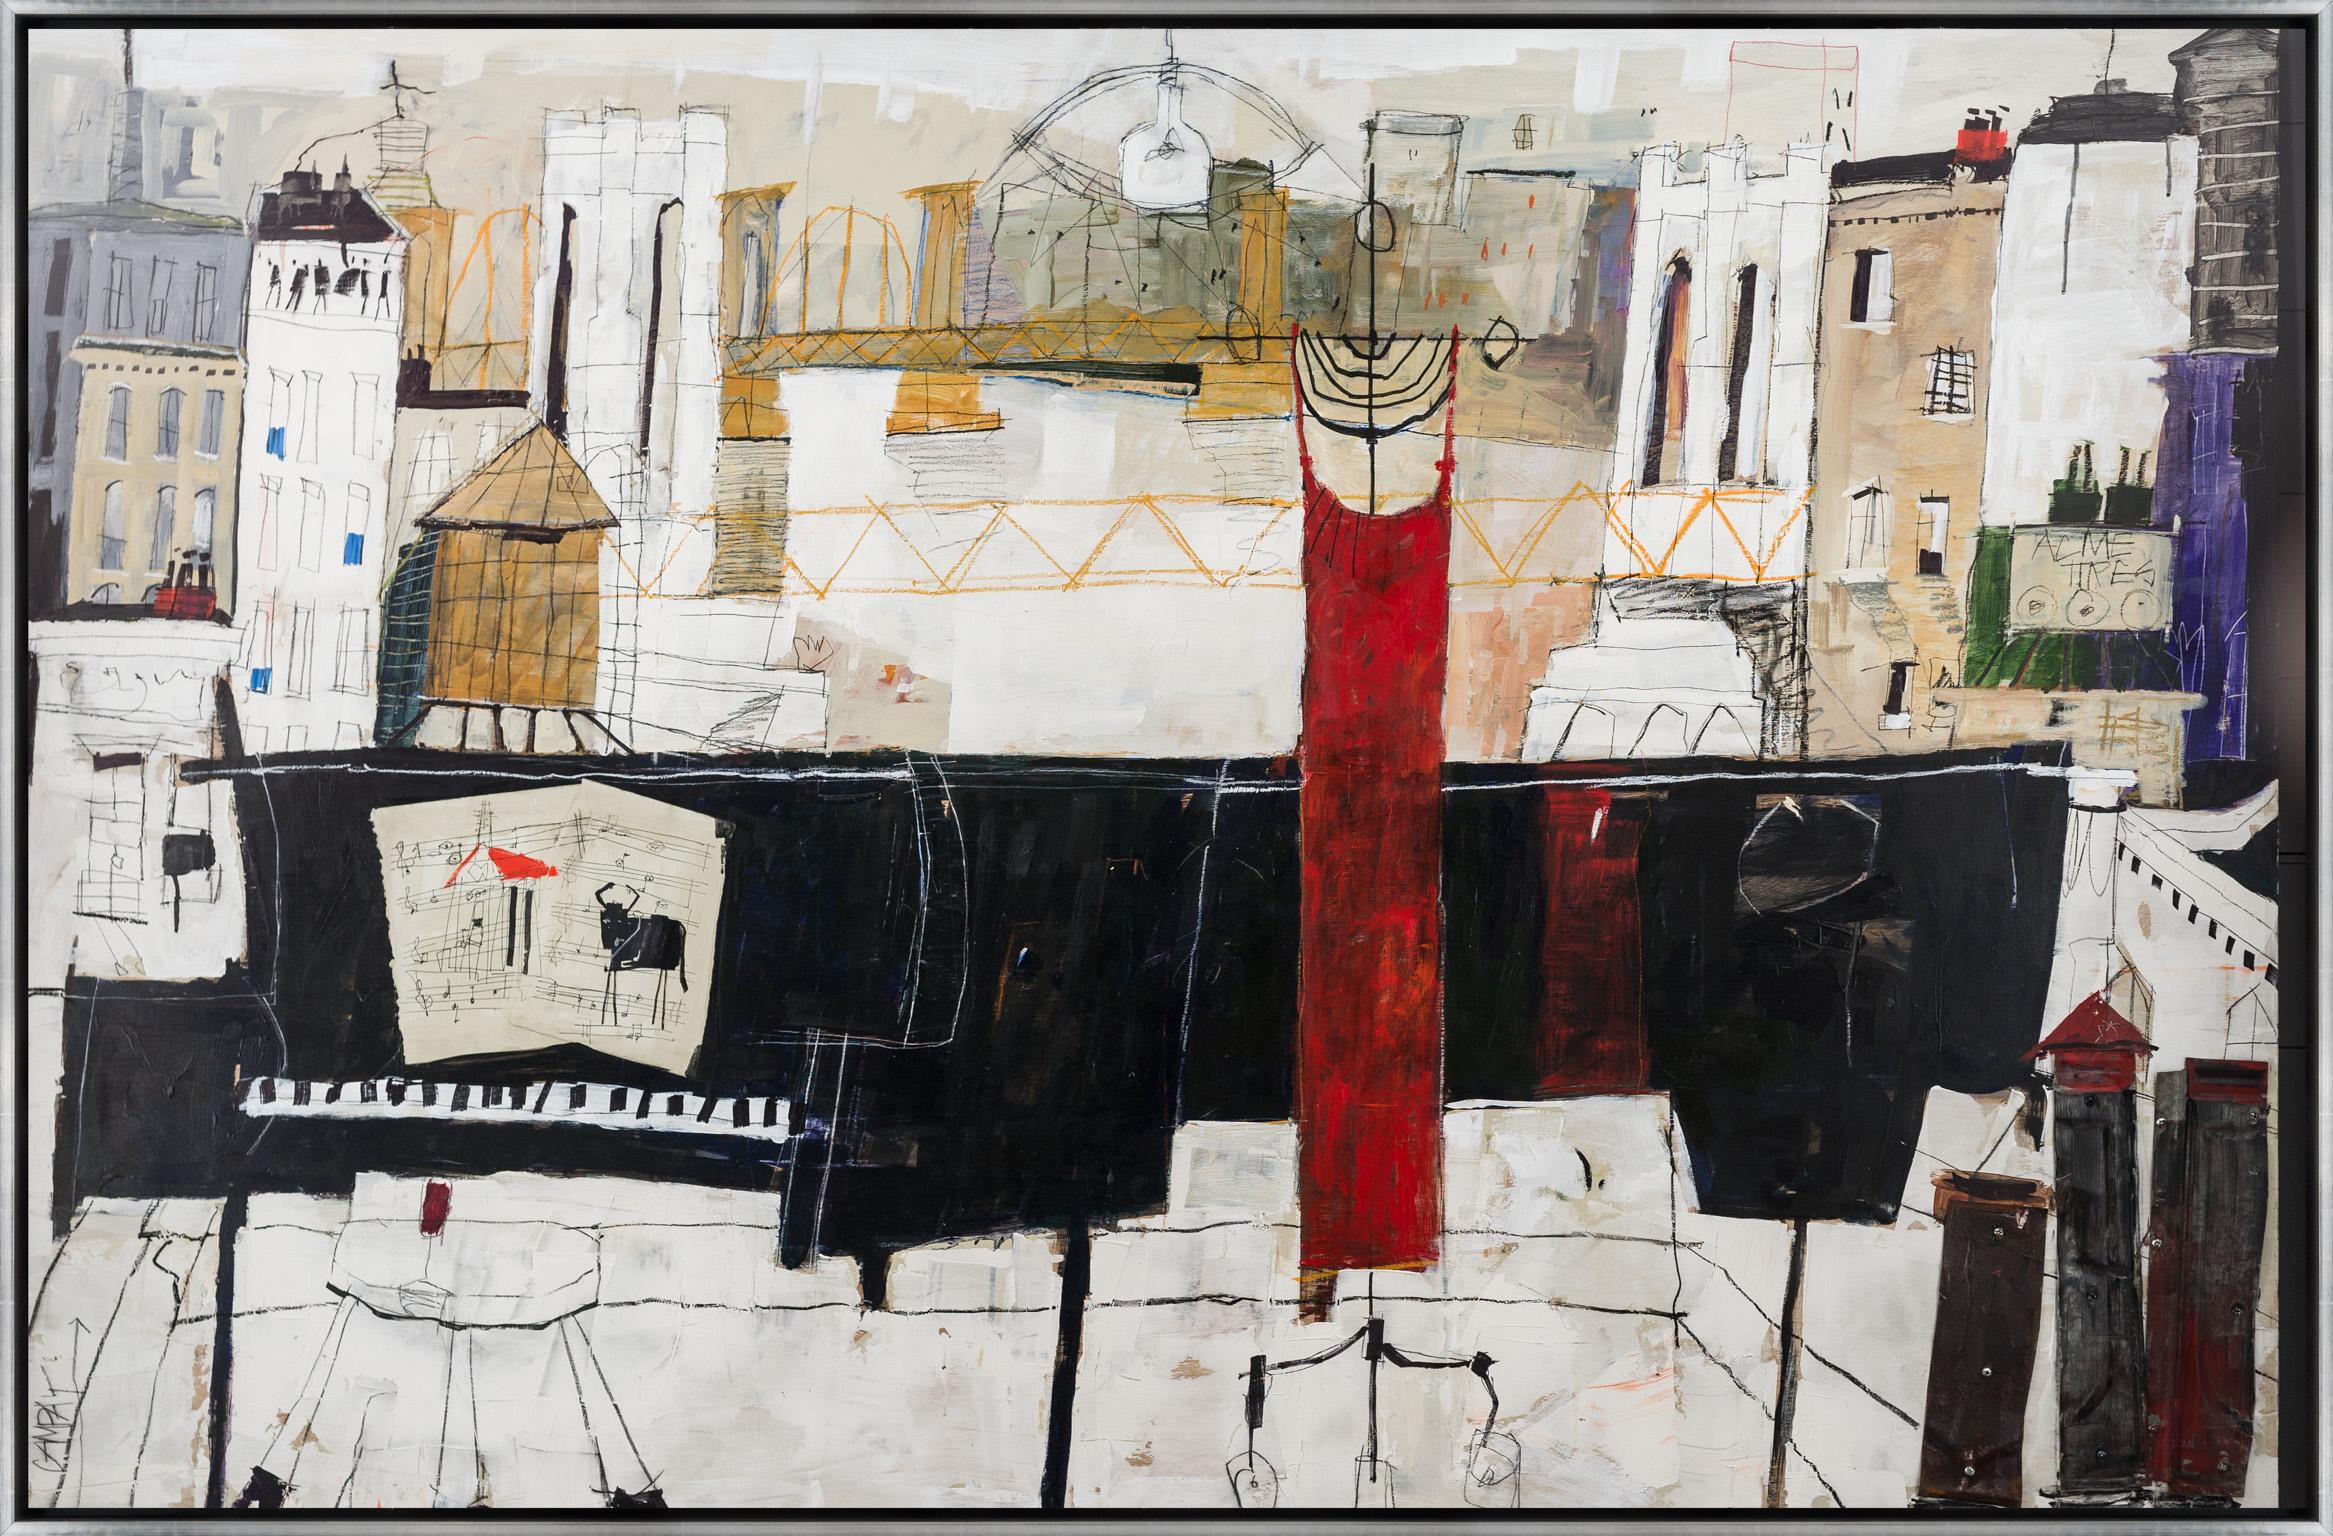 Dennis Campay Landscape Painting - "Sheet Music" Warm Piano Scene with Cityscape and Found Metal Objects